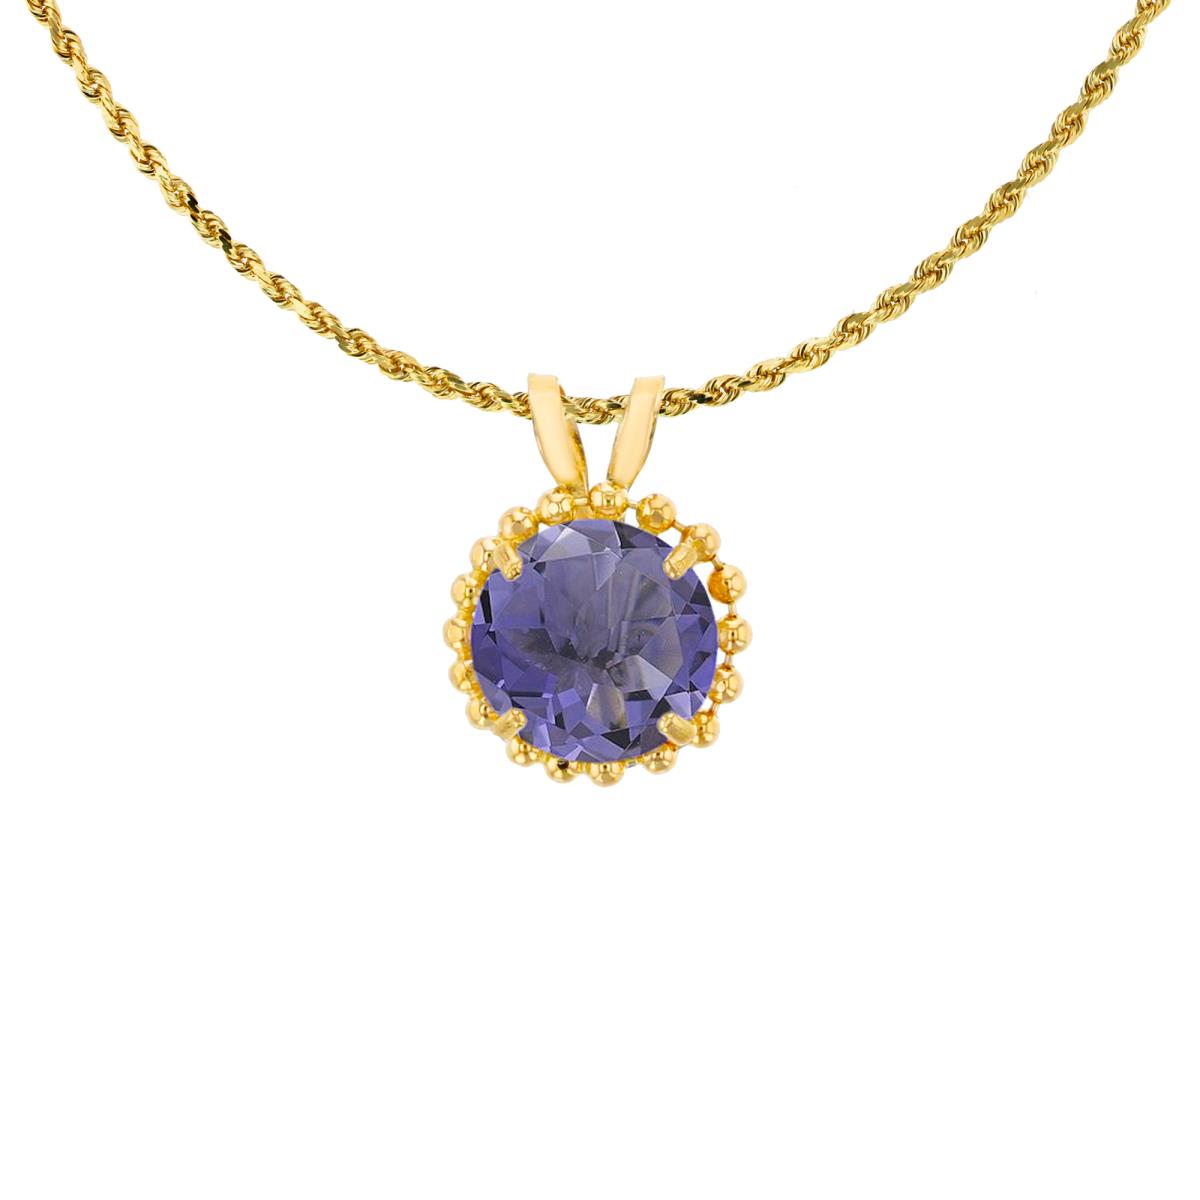 14K Yellow Gold 6mm Rd Cut Iolite with Bead Frame Rabbit Ear 18" Necklace